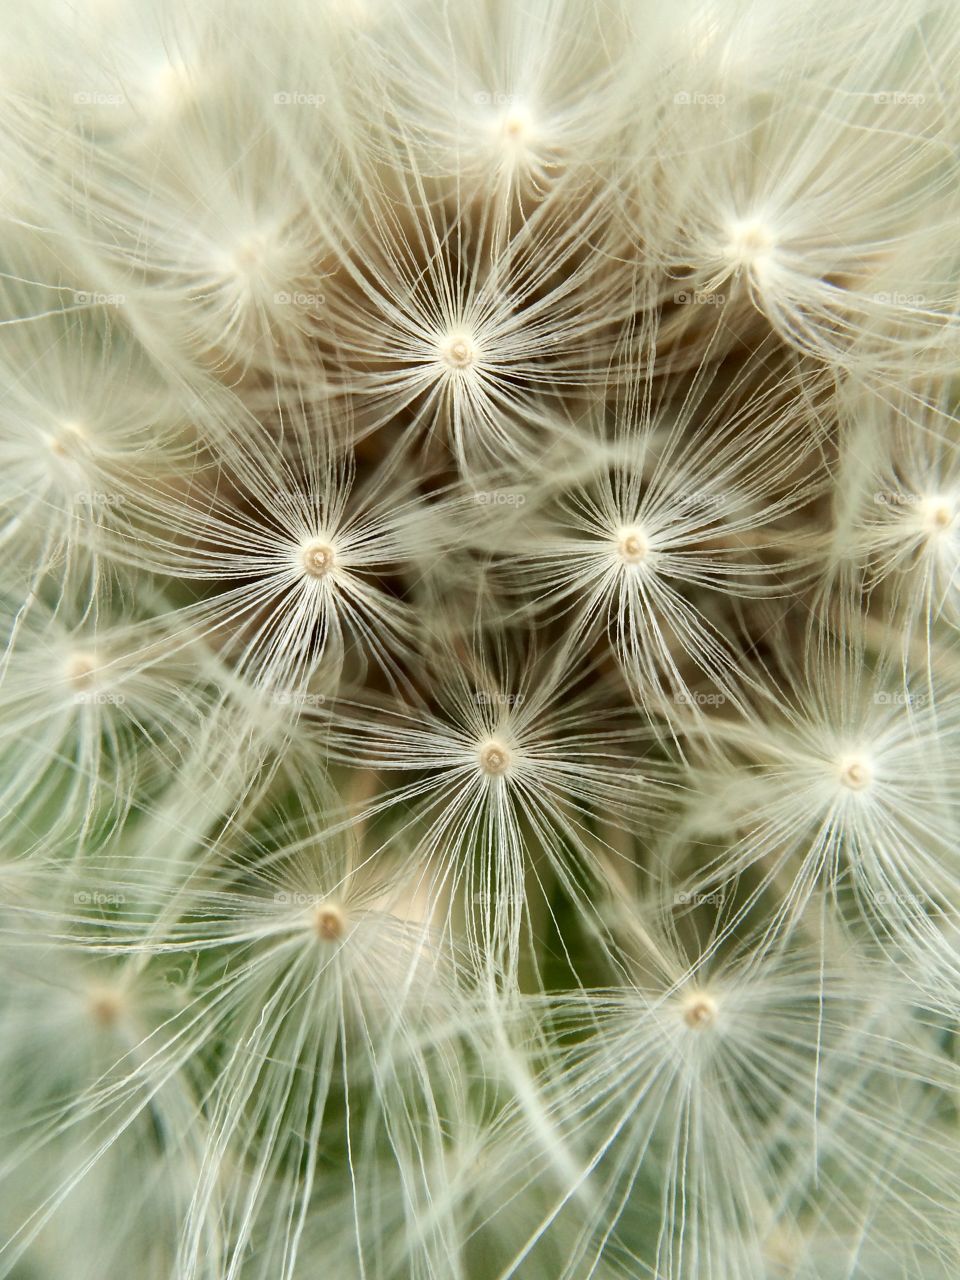 I took this photo whilst out for a walk. It was a large dandelion clock growing by the roadside. 
I love how the seeds look like little pearls.